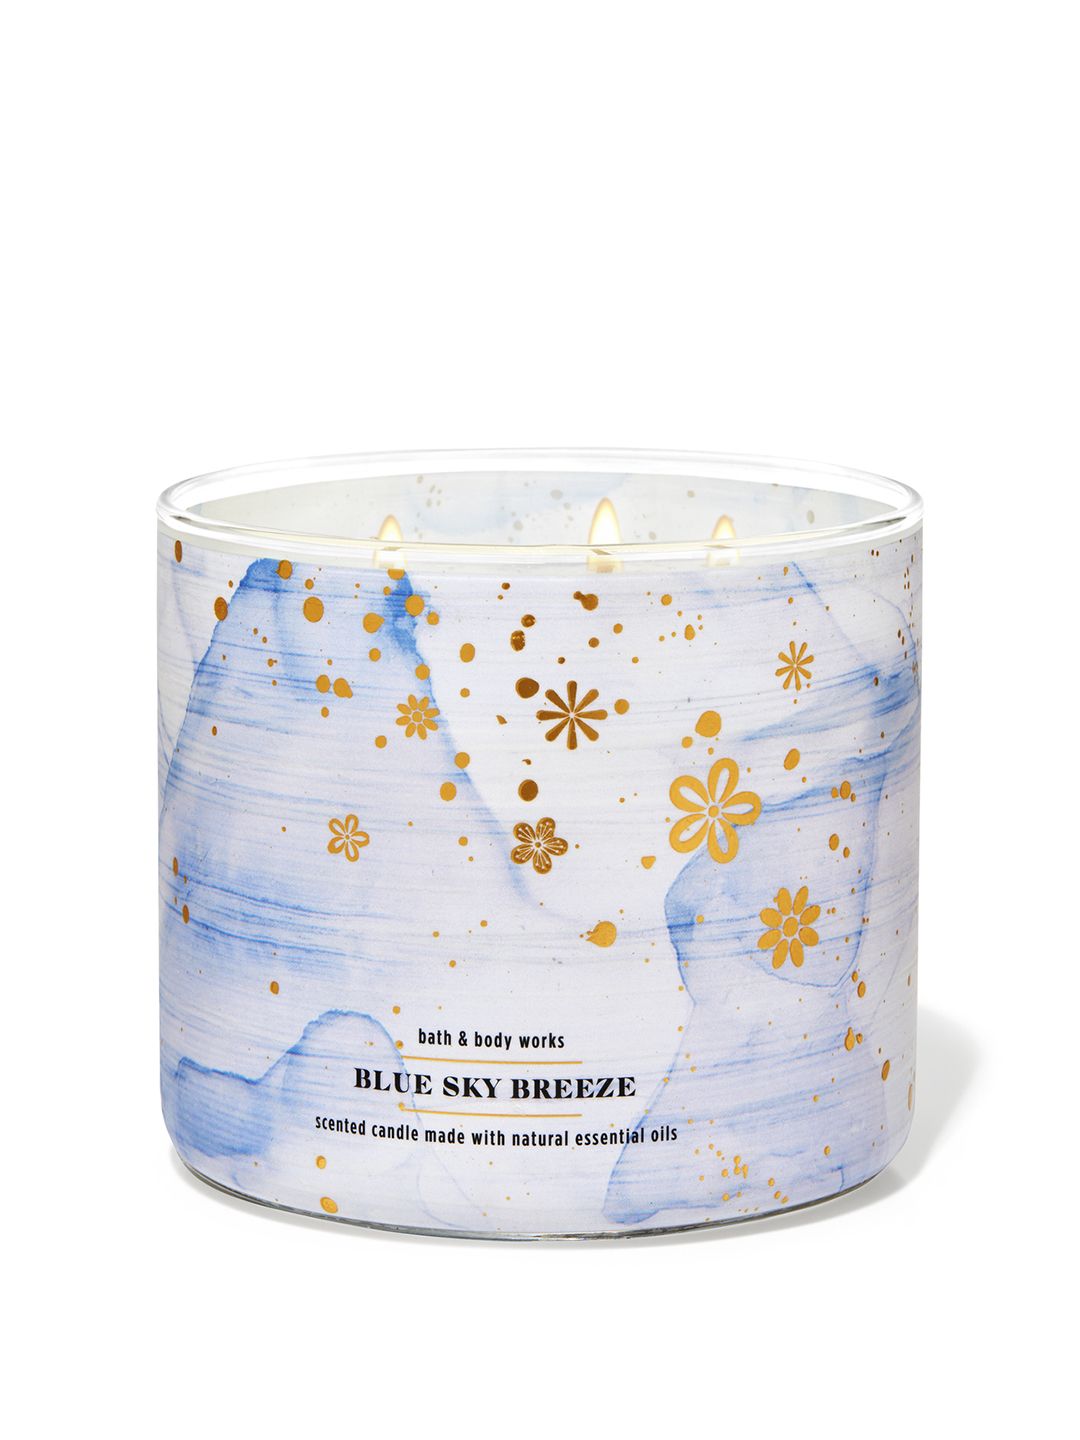 Bath & Body Works Blue Sky Breeze 3-Wick Scented Candle with Essential Oils - 411g Price in India